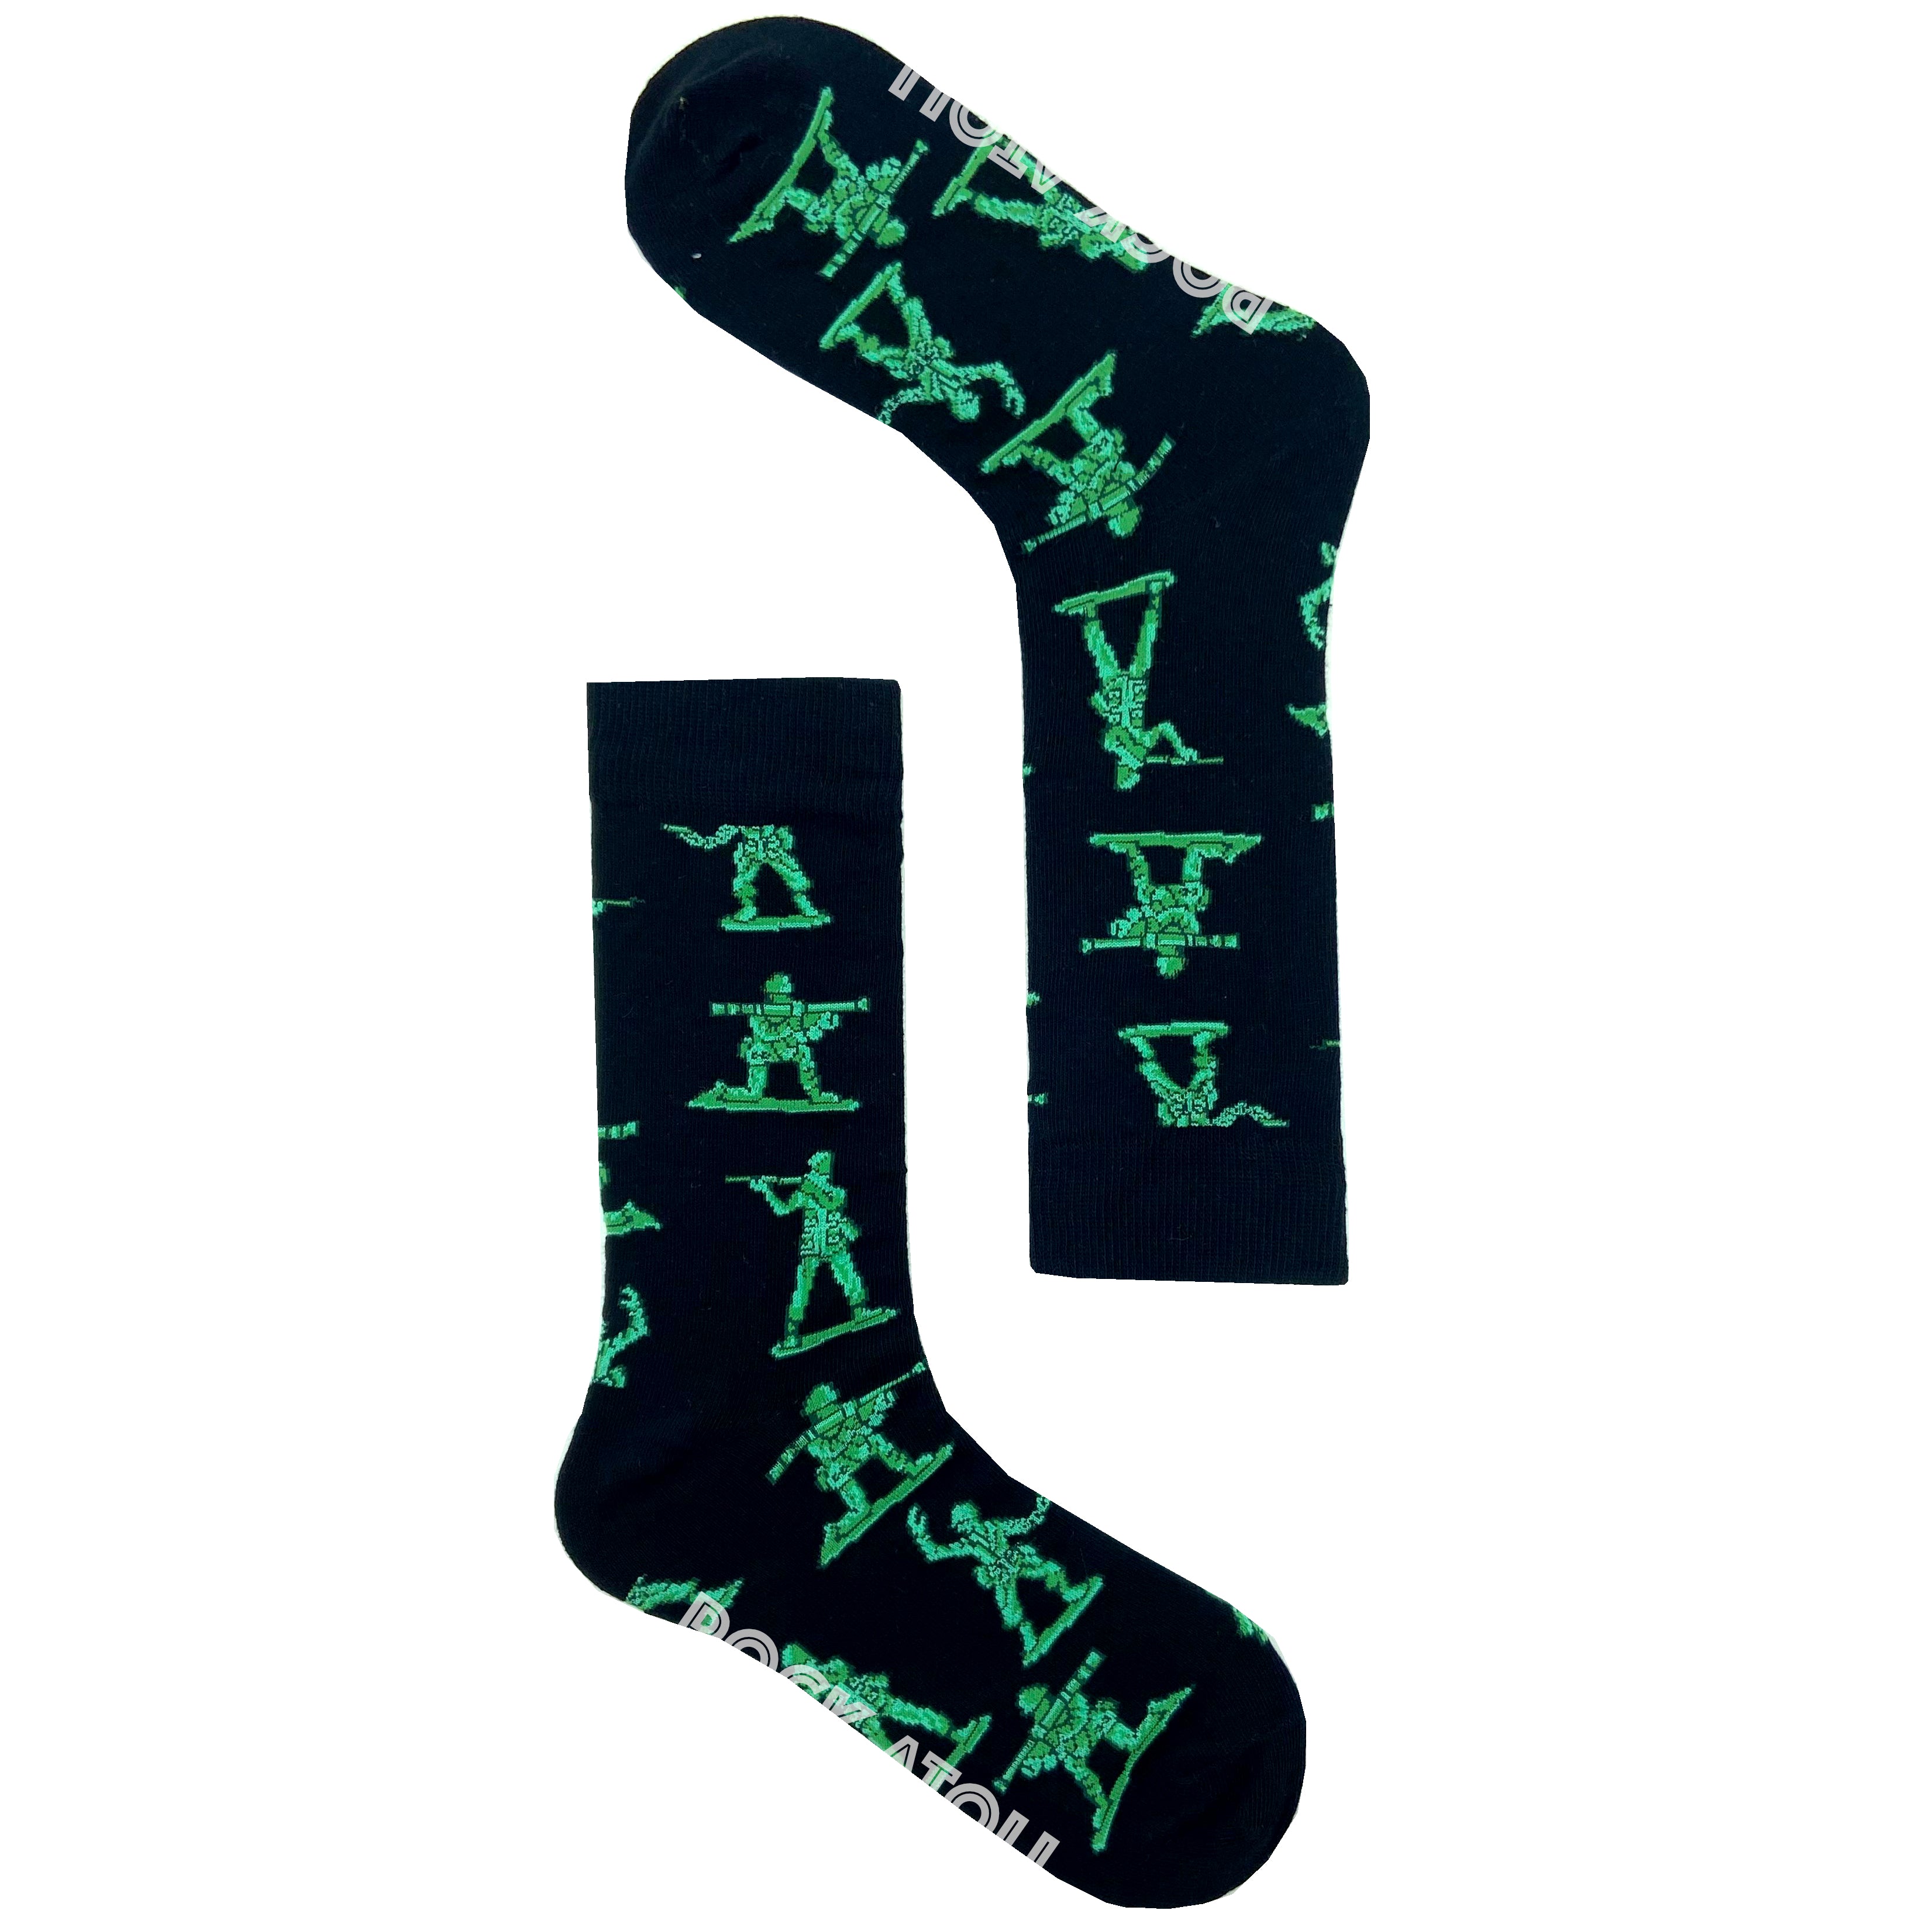 Little Green Army Toy Soldier Patterned Novelty Crew Socks in Black